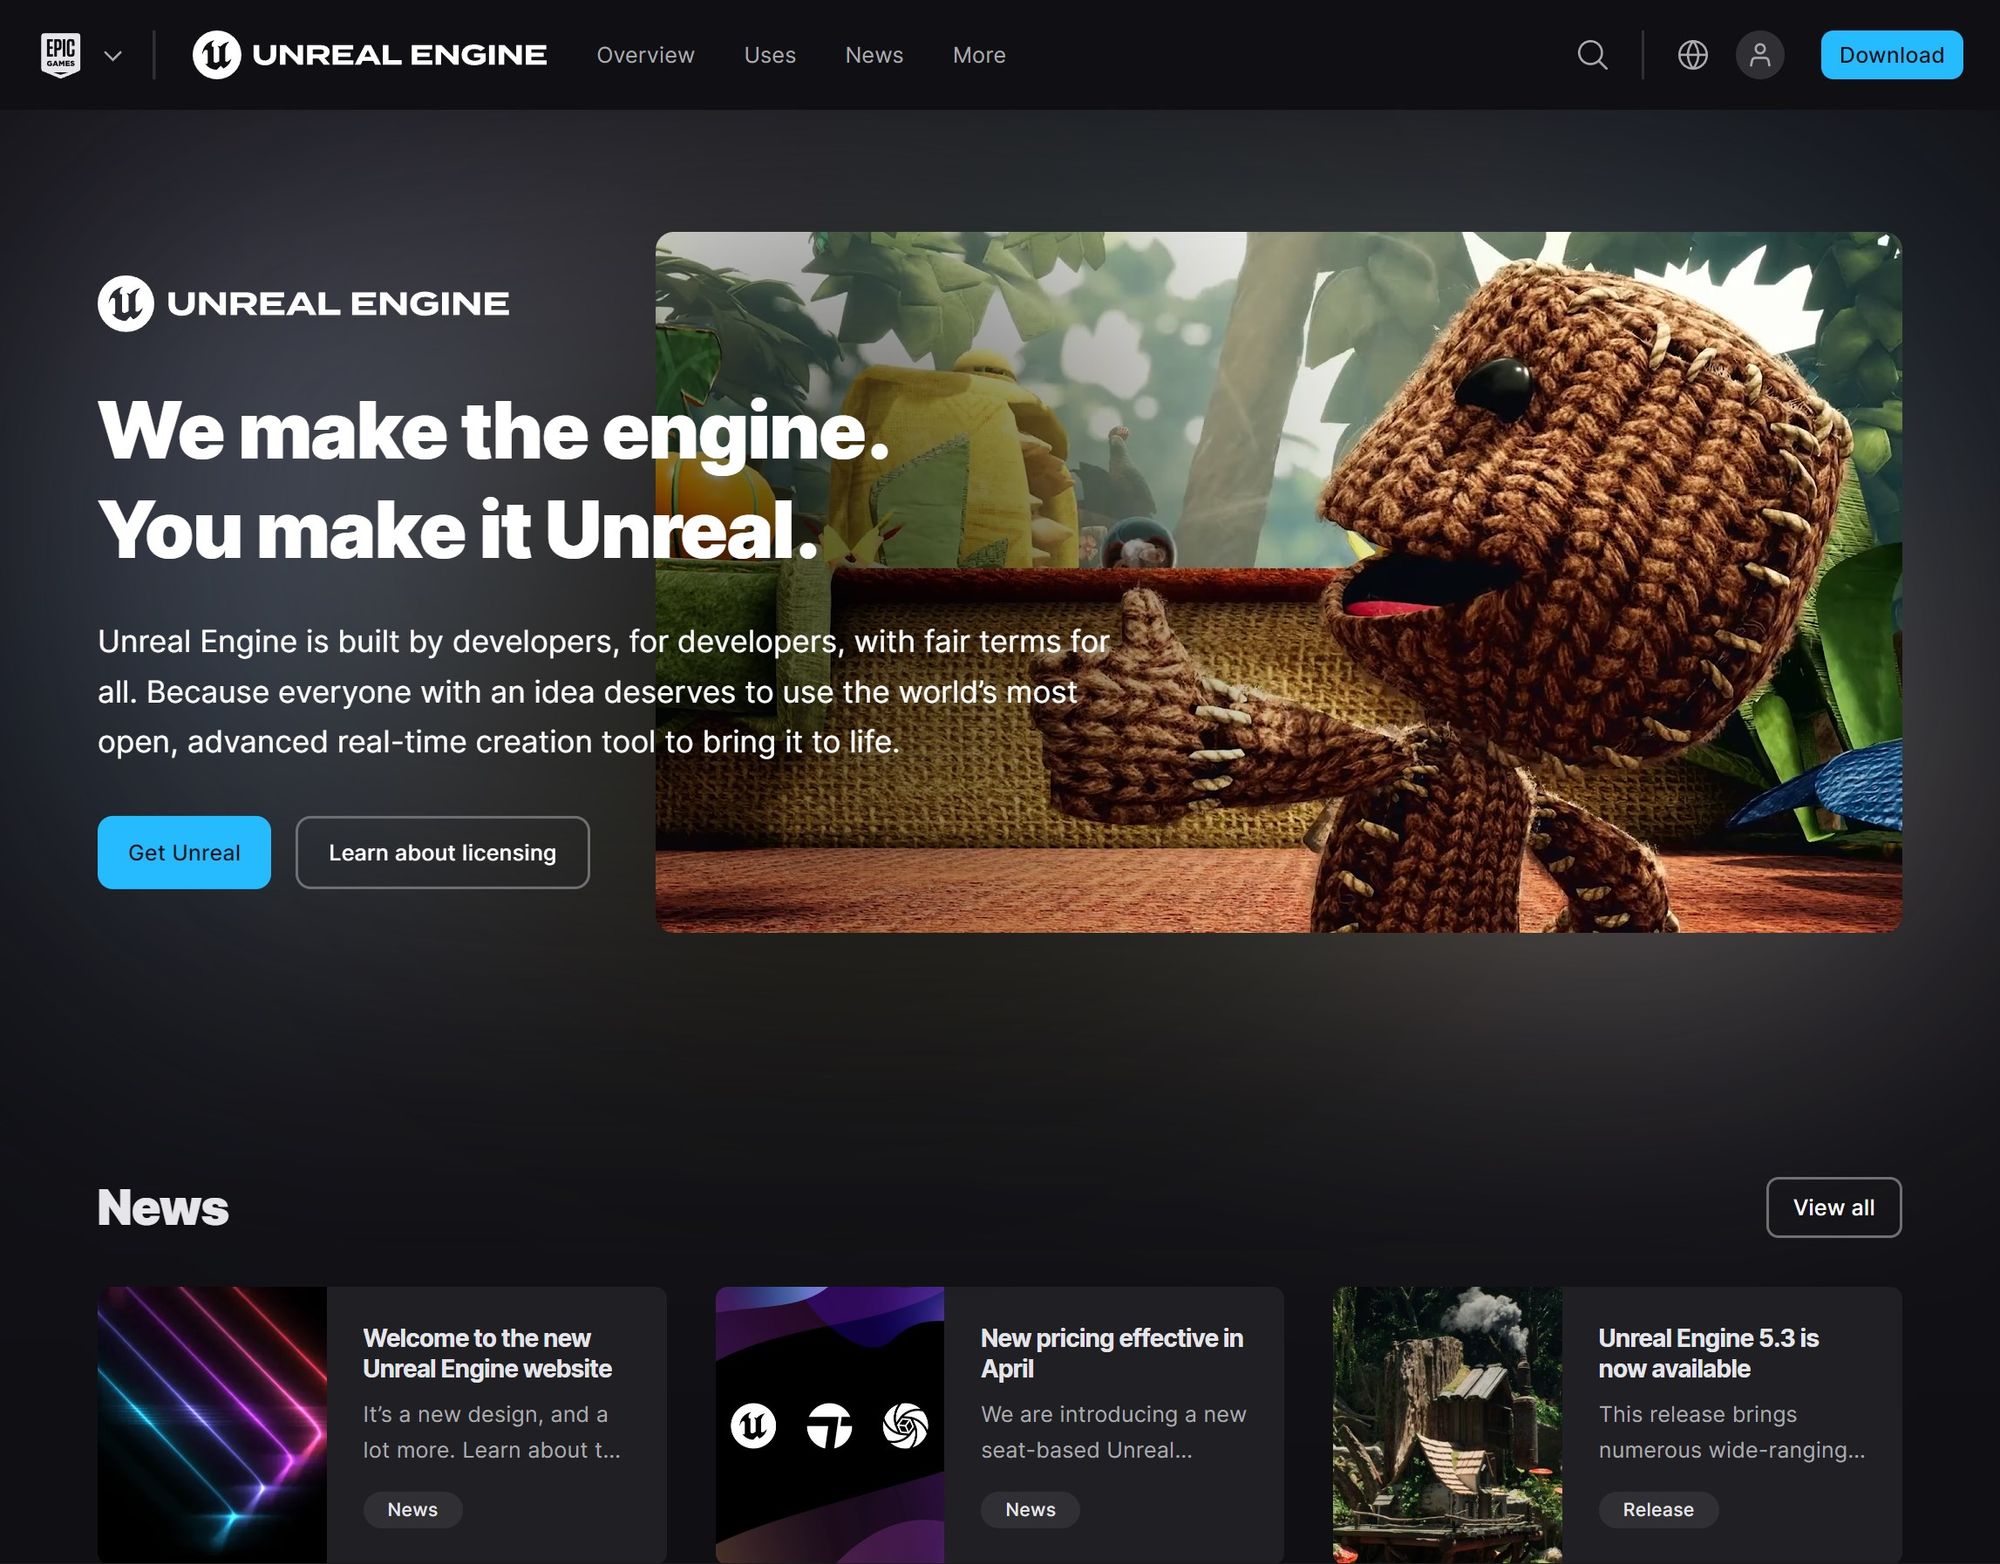 Epic Games has launched a redesigned Unreal Engine website.